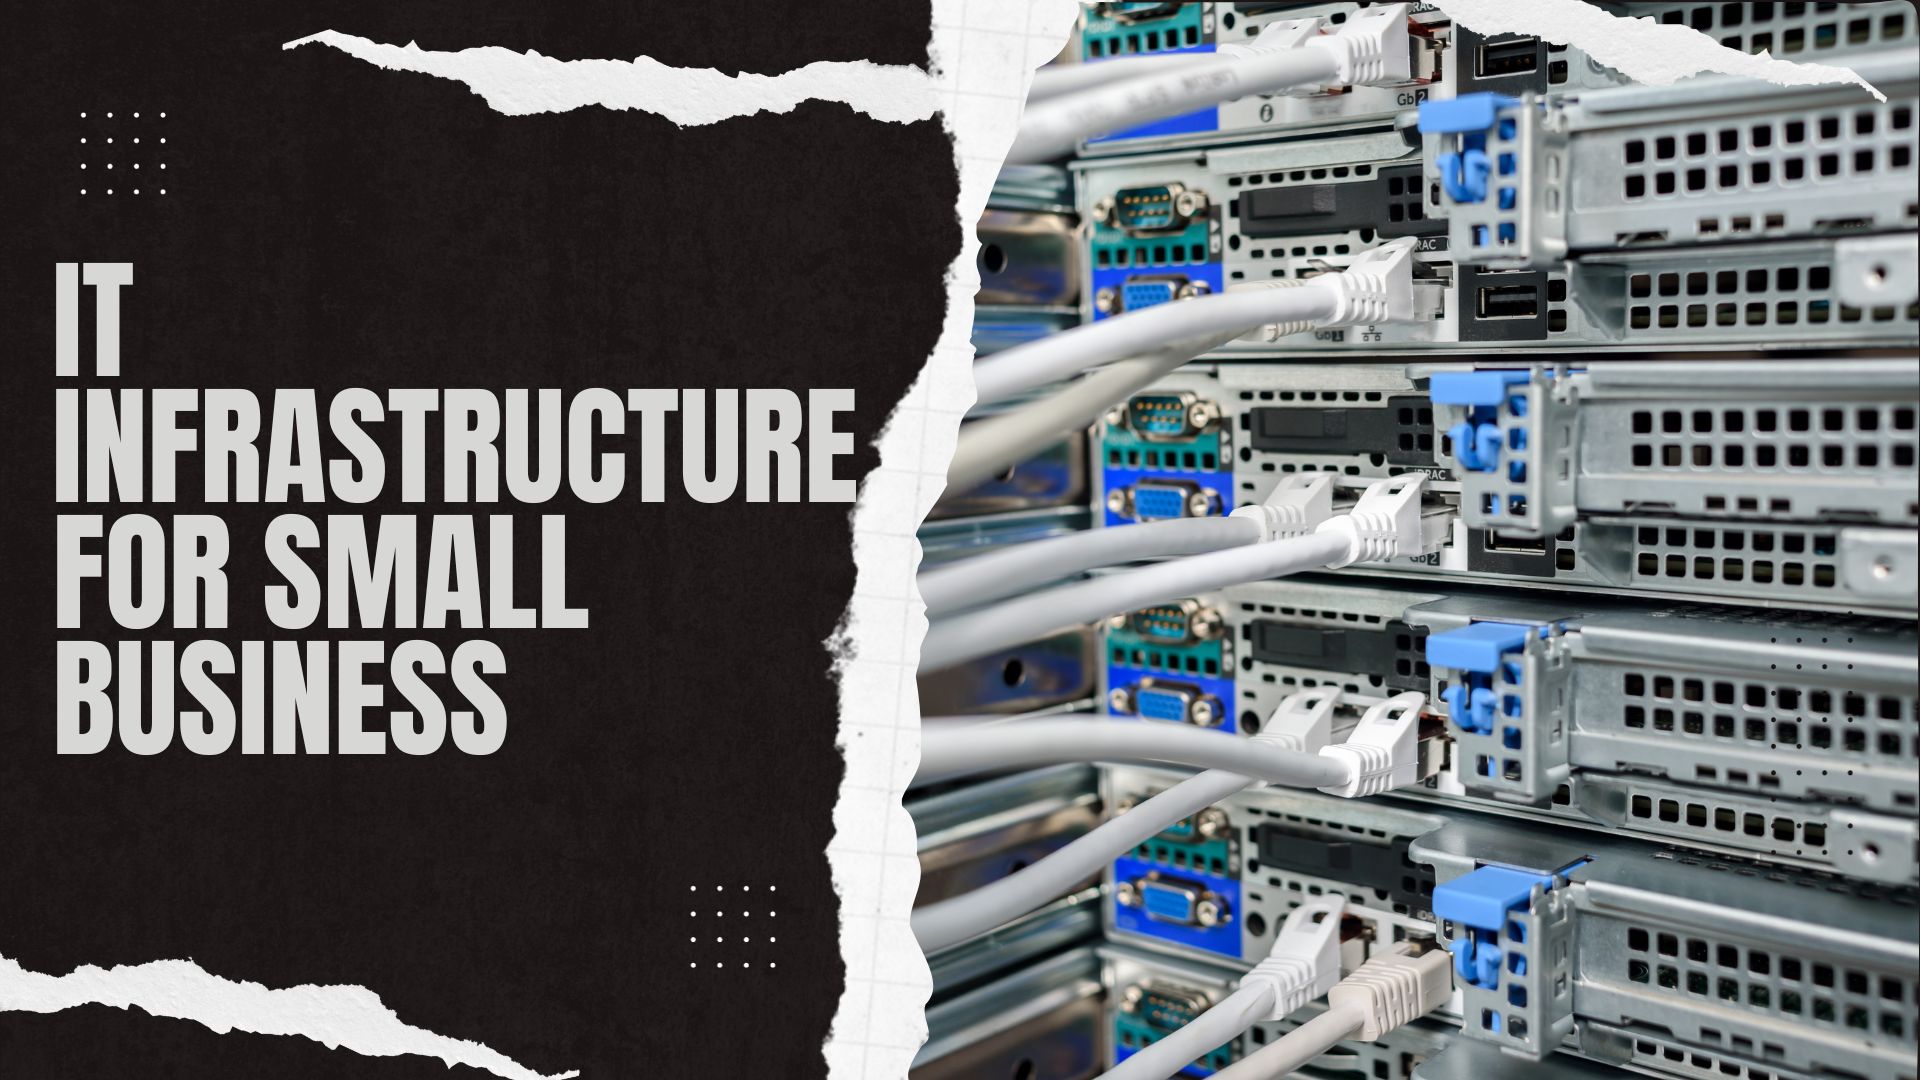 IT Infrastructure for Small Business